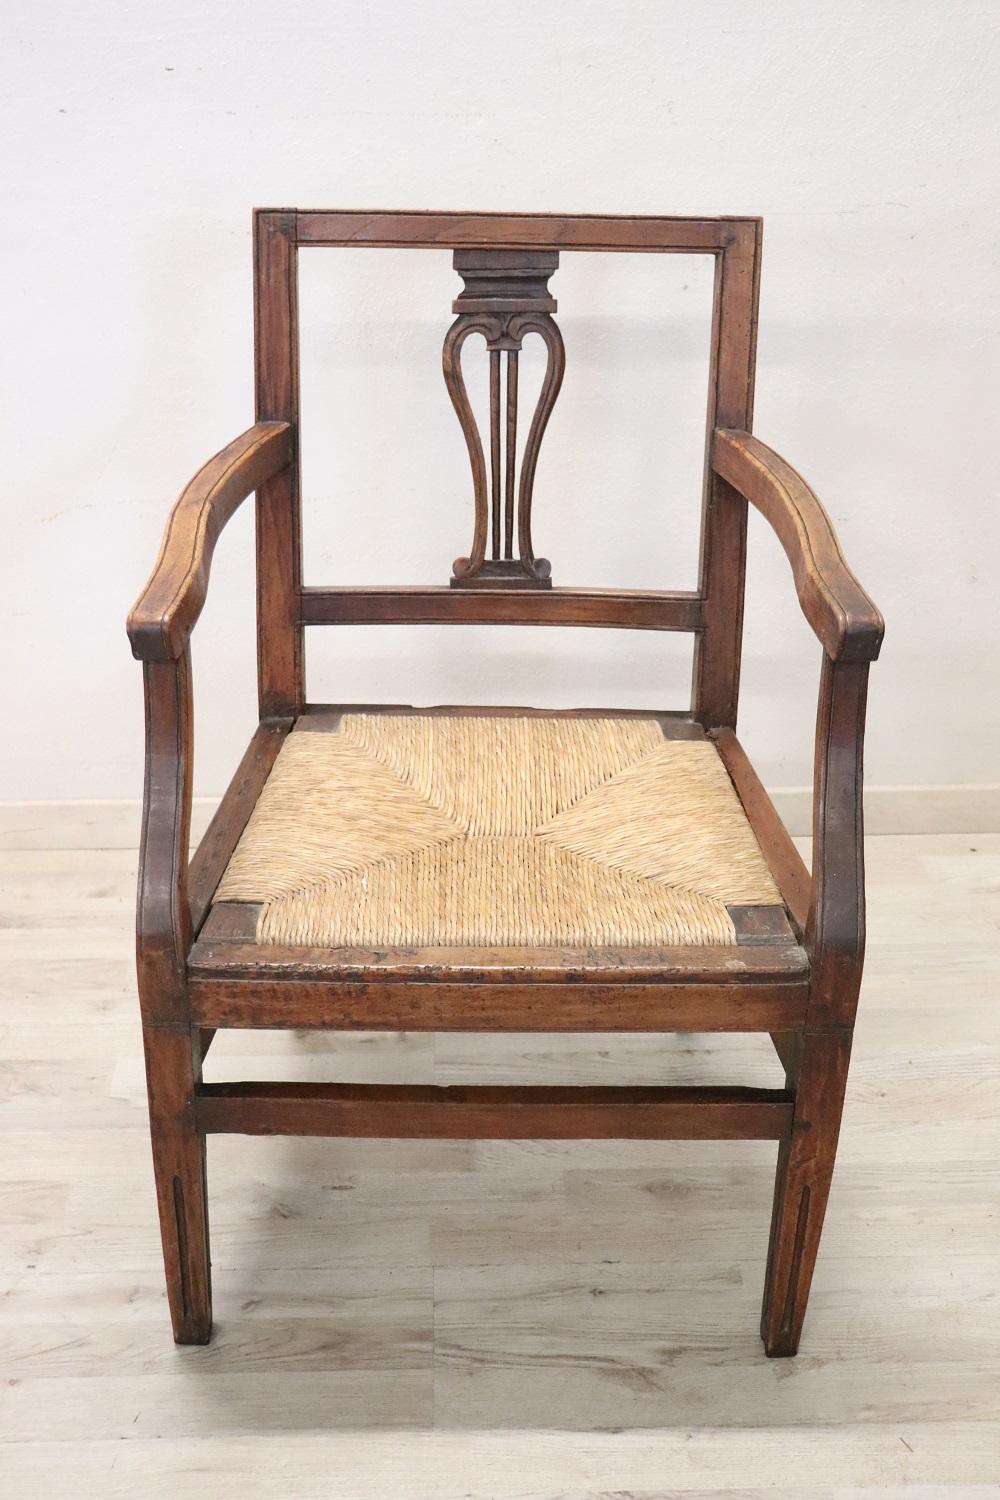 Beautiful 18th century of the period Louis XVI Italian antique rustic armchair in solid walnut wood. The armchair is very simple and essential. Beautifully decoration in wood. The seat is wide and comfortable in rustic straw. The armchair is in